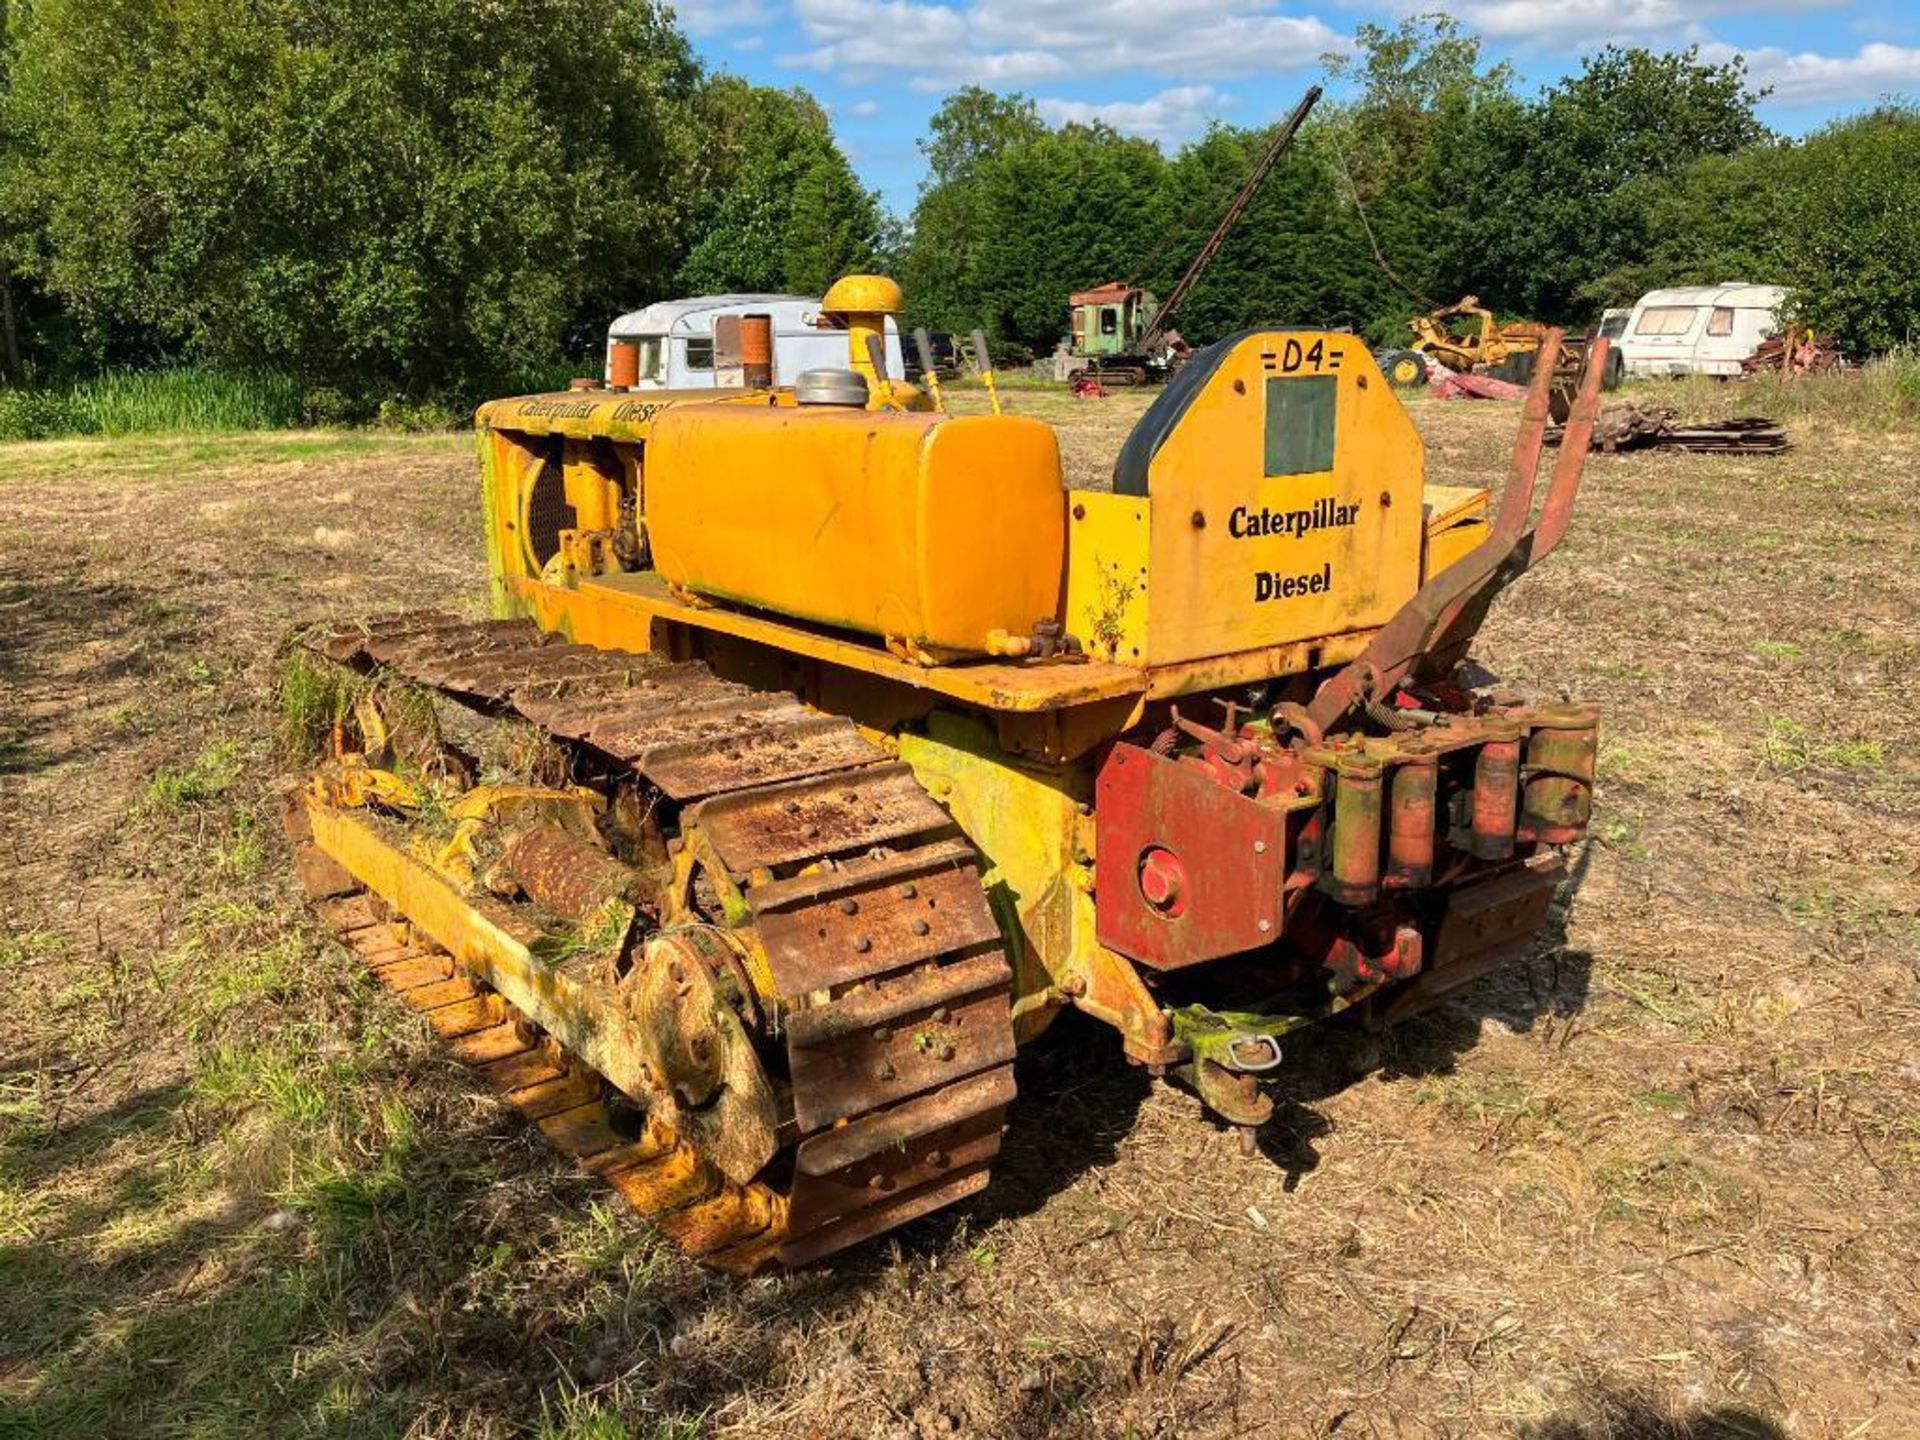 1949 Caterpillar D4 wide gauge metal tracked crawler with 16" tracks , swinging drawbar and rear cab - Image 5 of 18